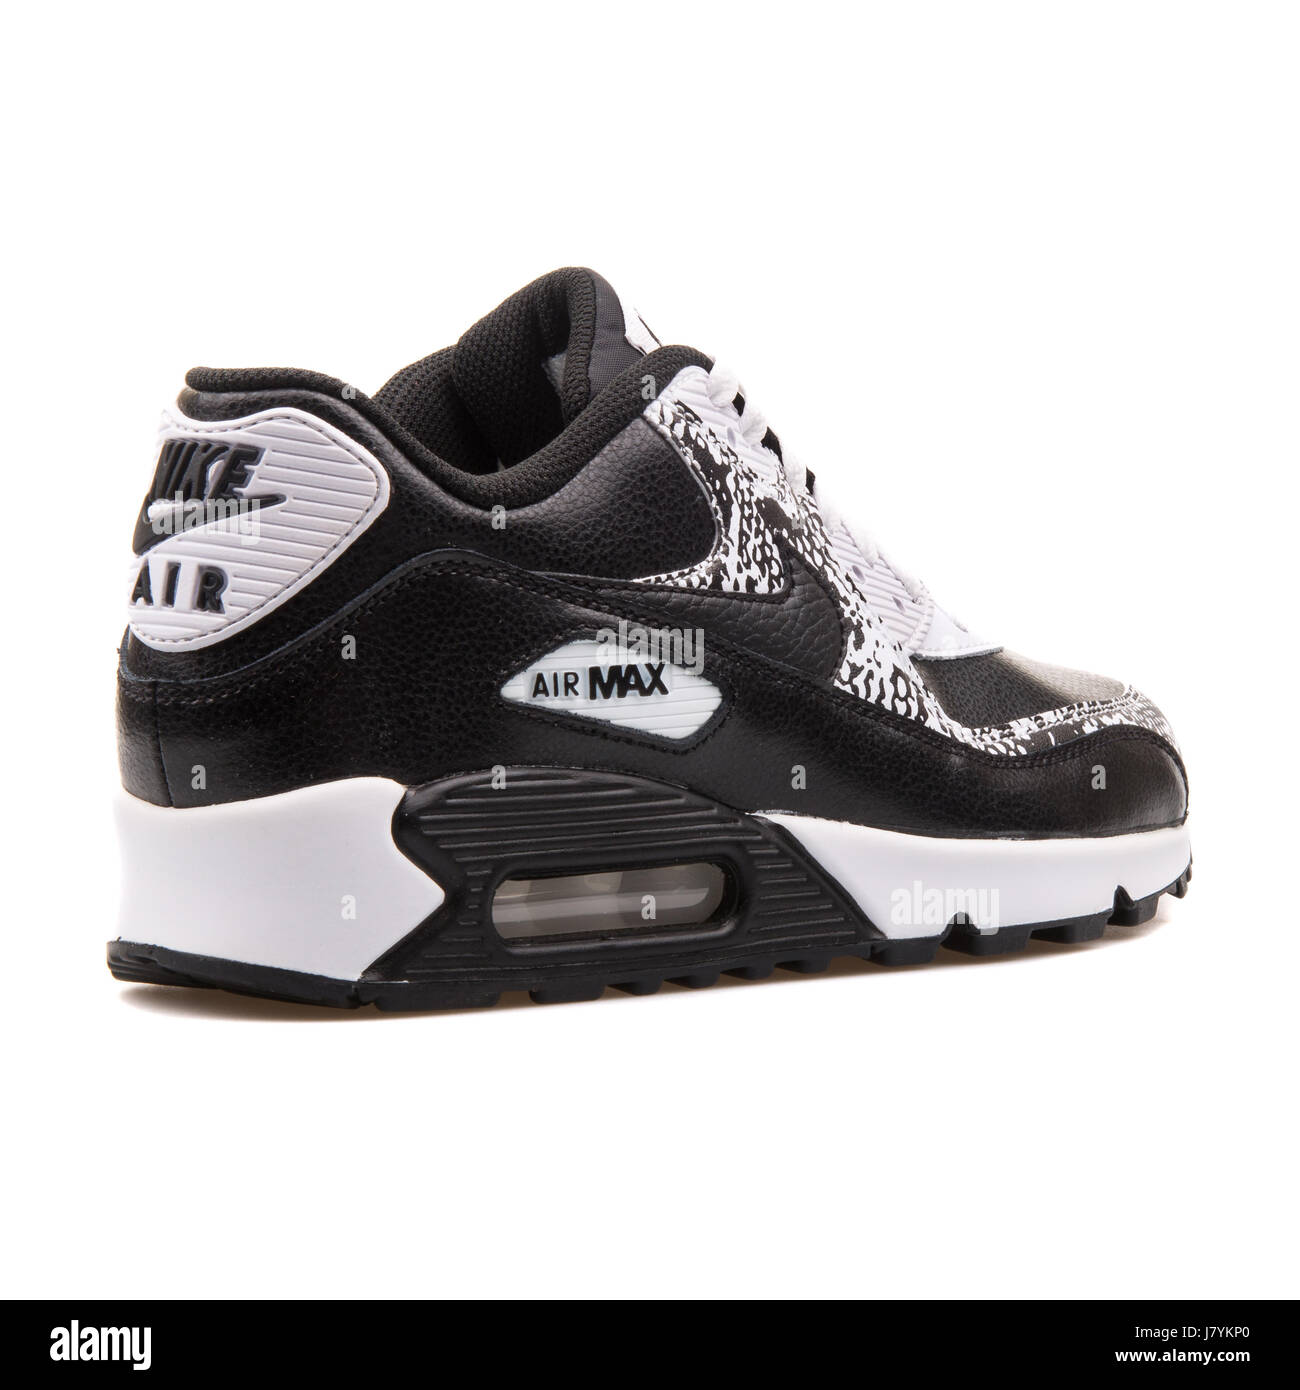 Nike Air Max 90 Premium LTR (GS) Youth Black and White Running Sneakers -  724871-001 Stock Photo - Alamy